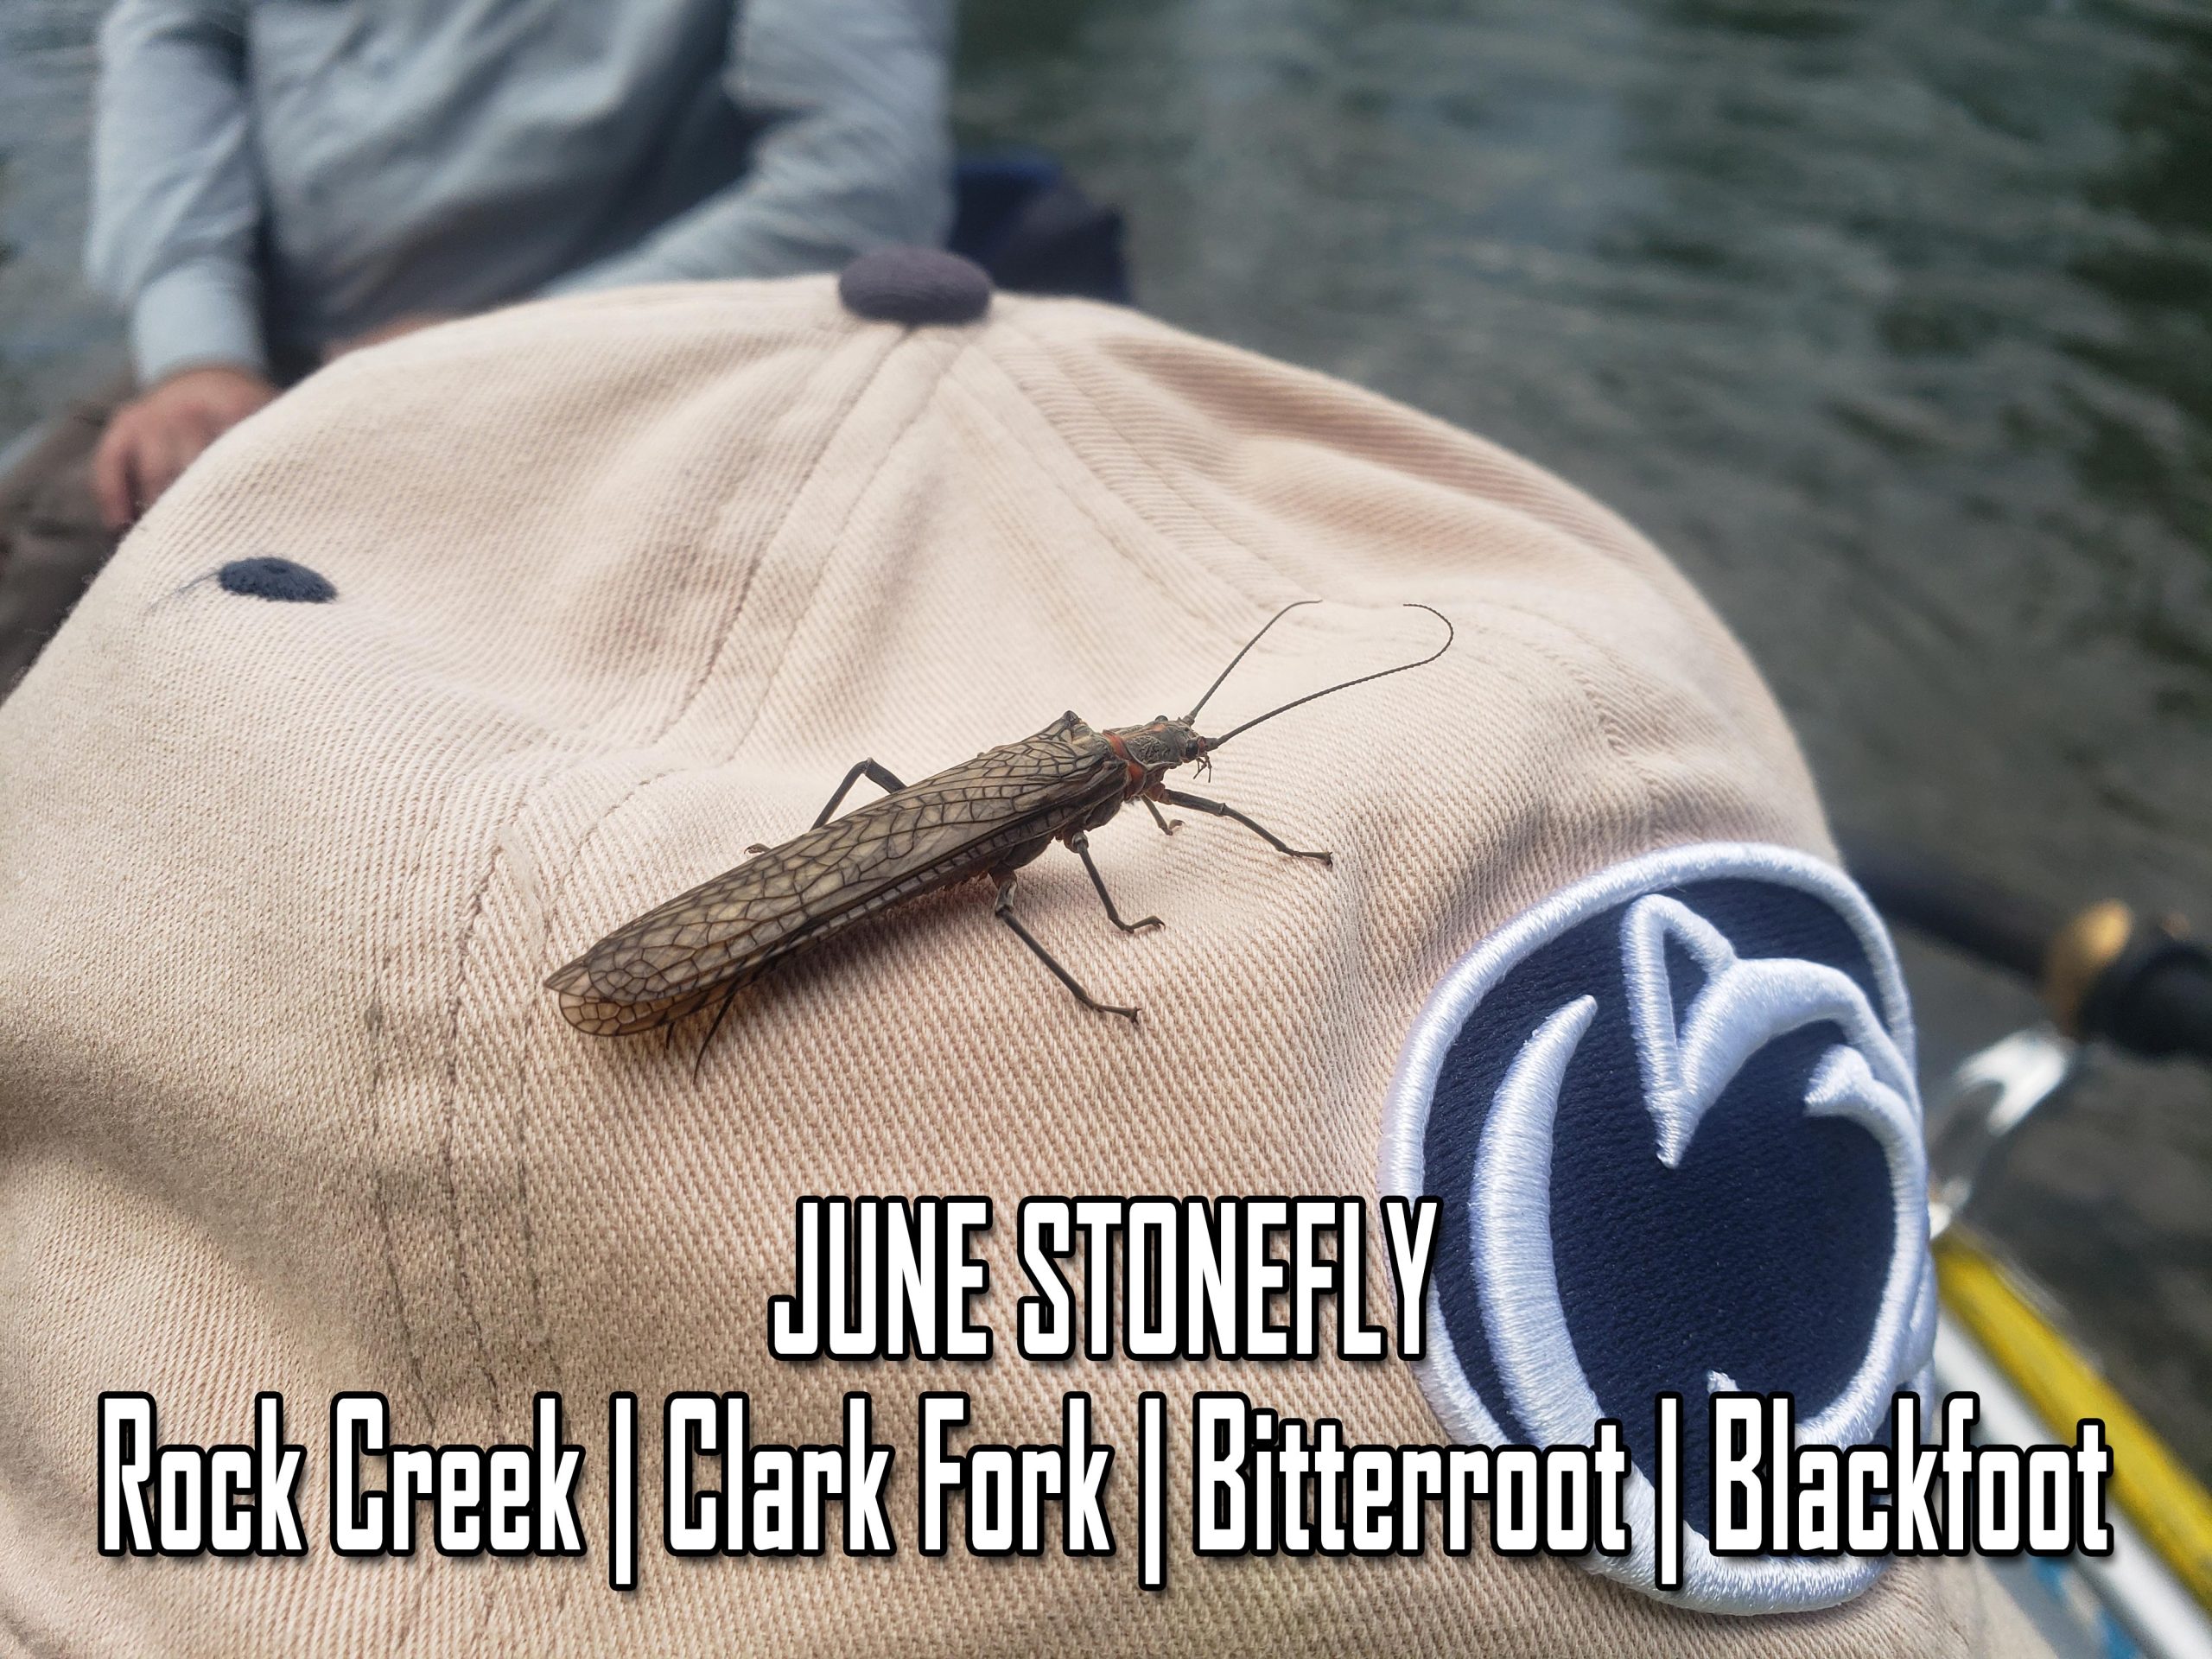 Come Enjoy The Stonefly Hatch On Some Of Montana's Best Rivers. 5 Days Of Drift Boat Fishing Landing Big Fish On Big Flies.